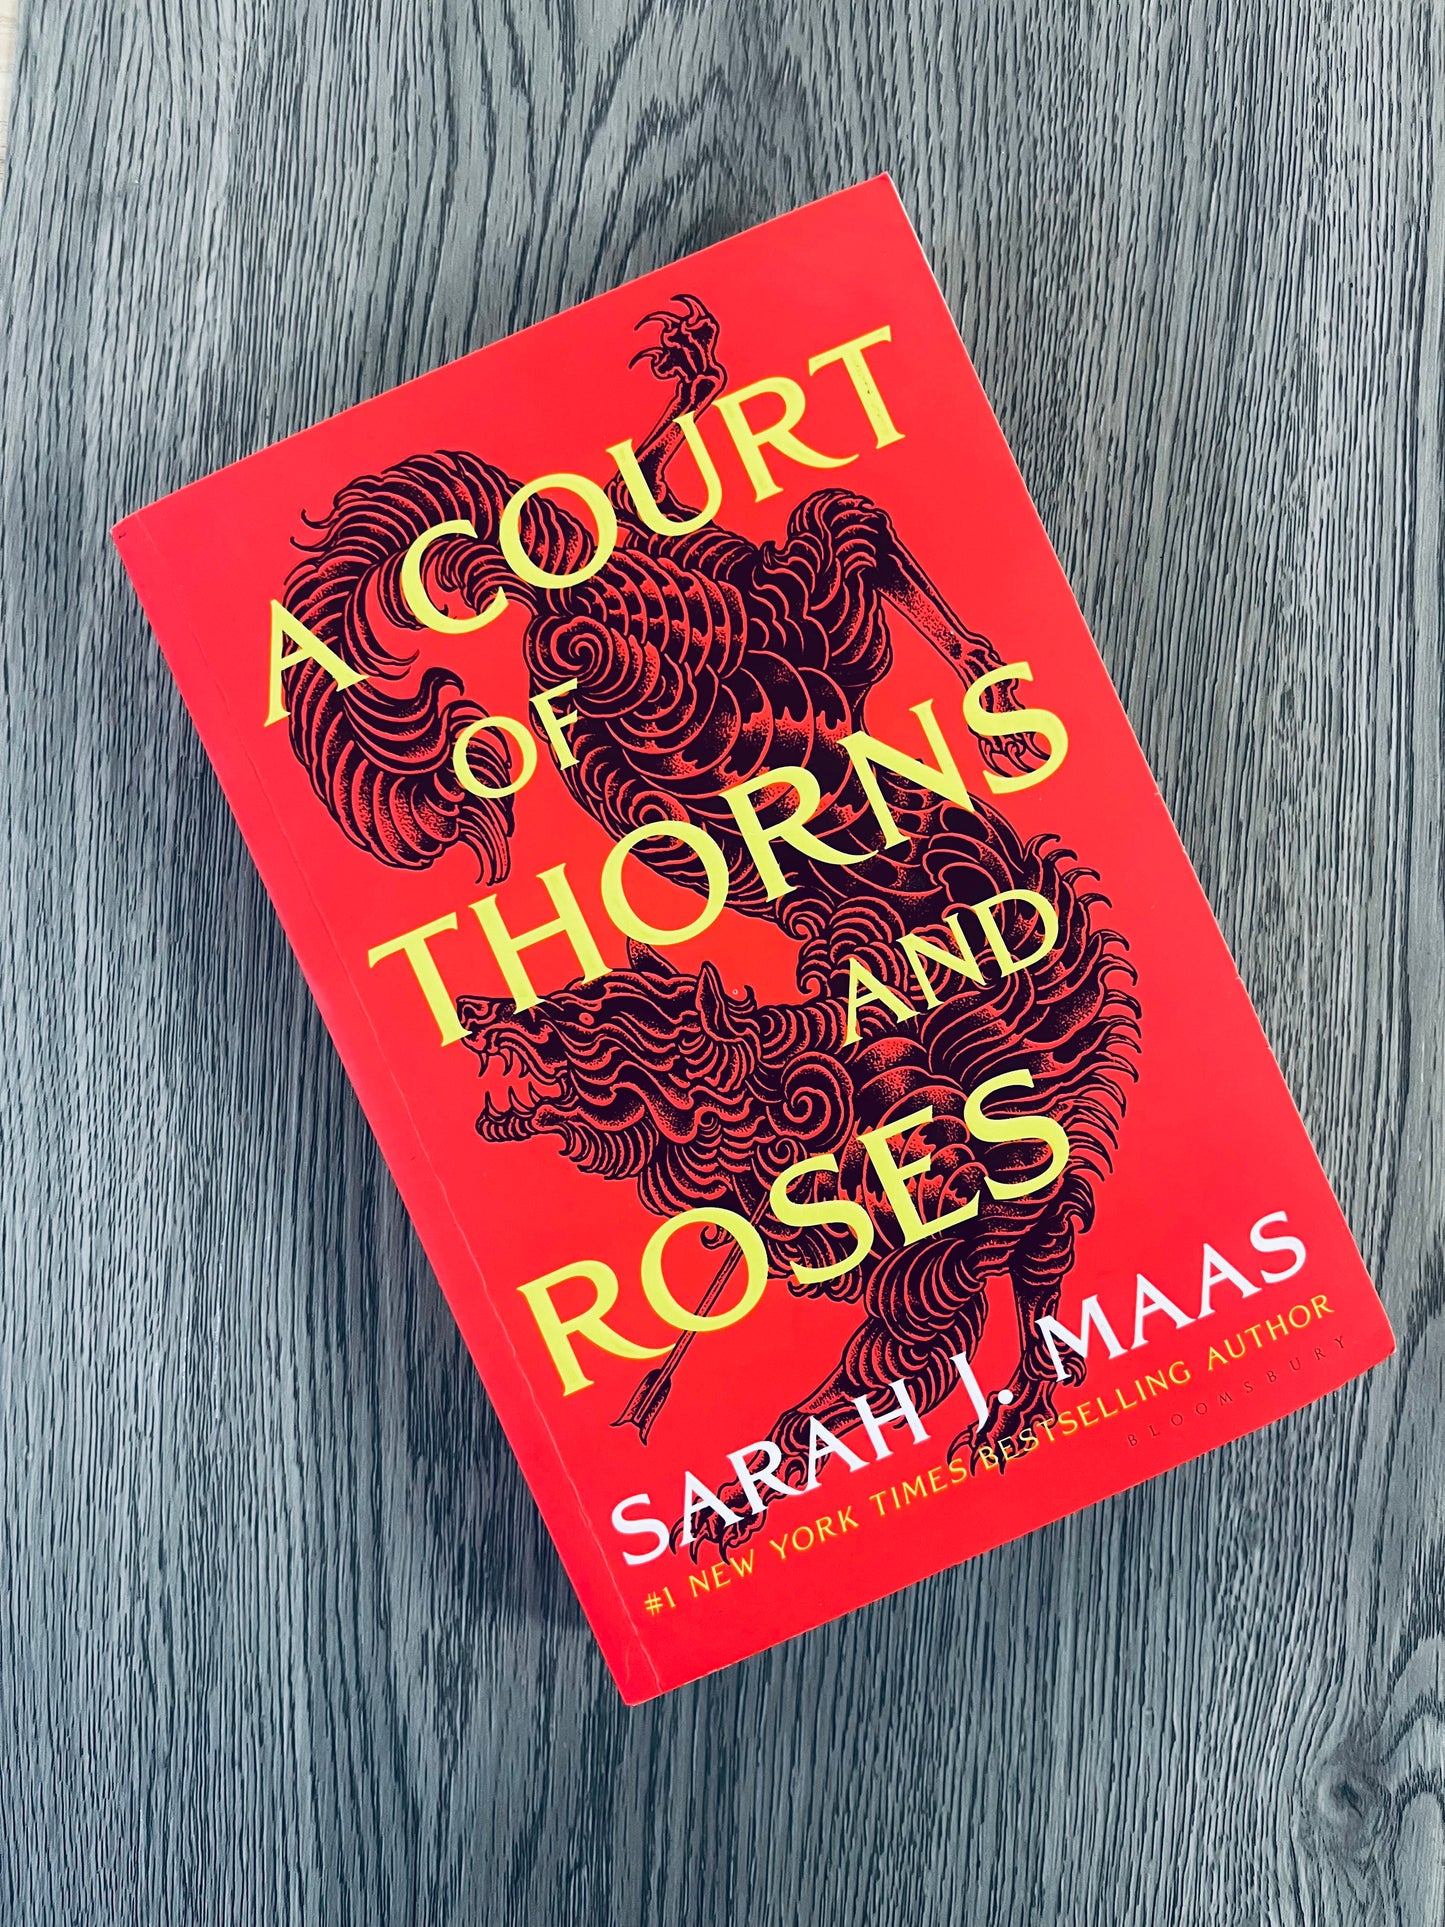 A Court of Thorns & Roses (ACOTAR #1) by Sarah J Maas